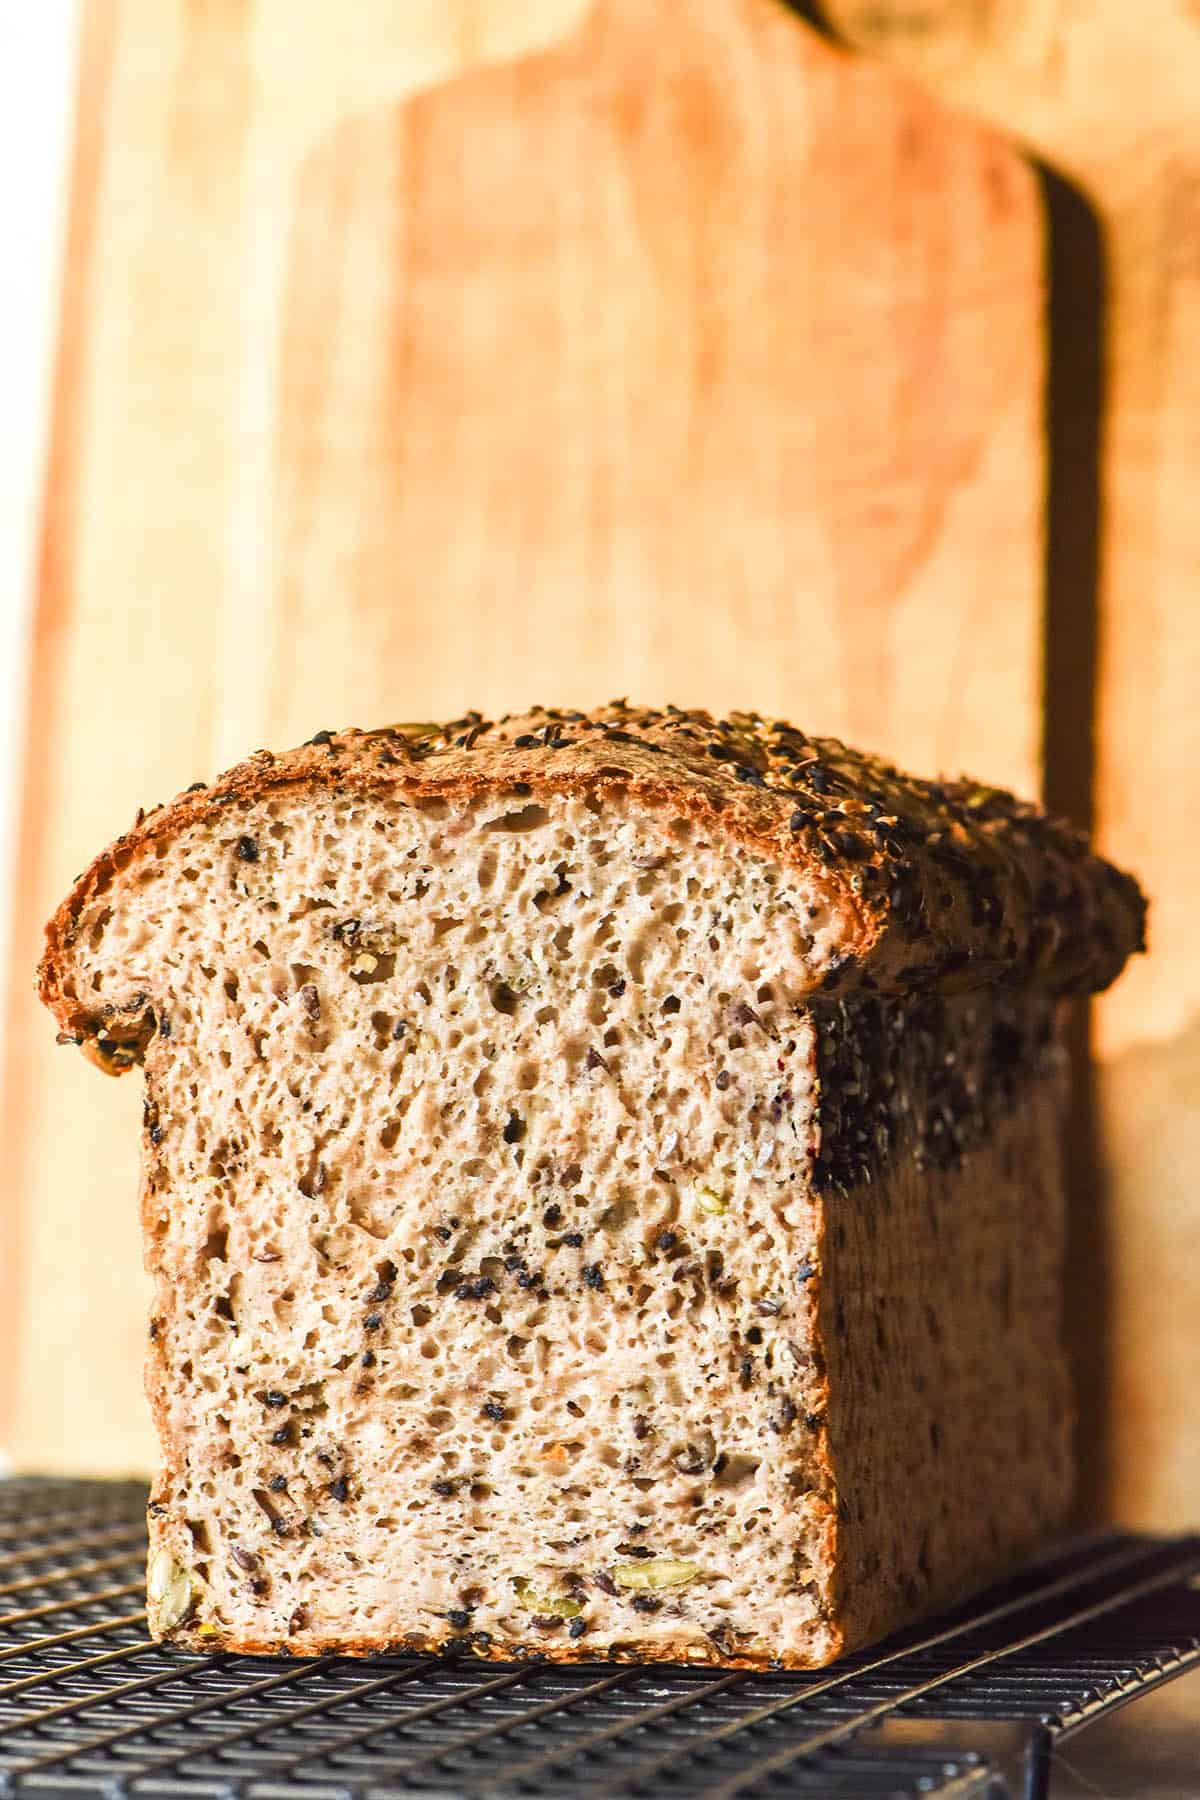 An image of a sliced loaf of gluten free seeded bread on a cooling rack against pale wood chopping boards in the background.